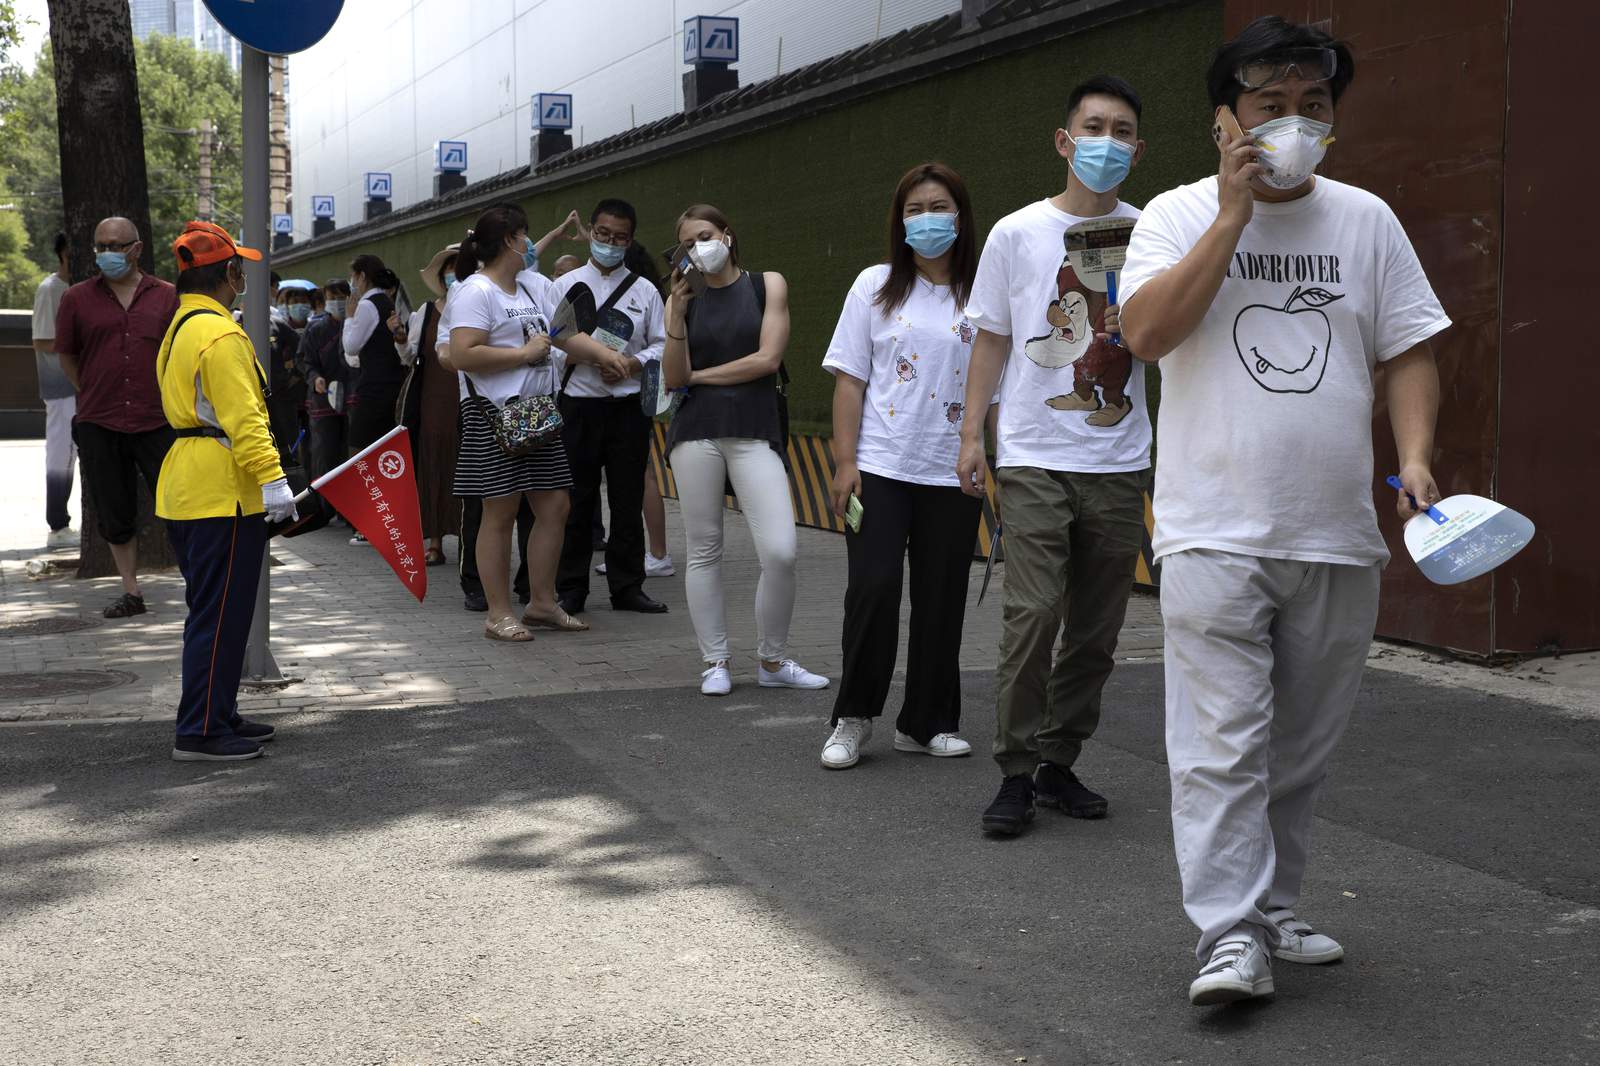 The Latest: S. Korea baseball fans will have to wear masks